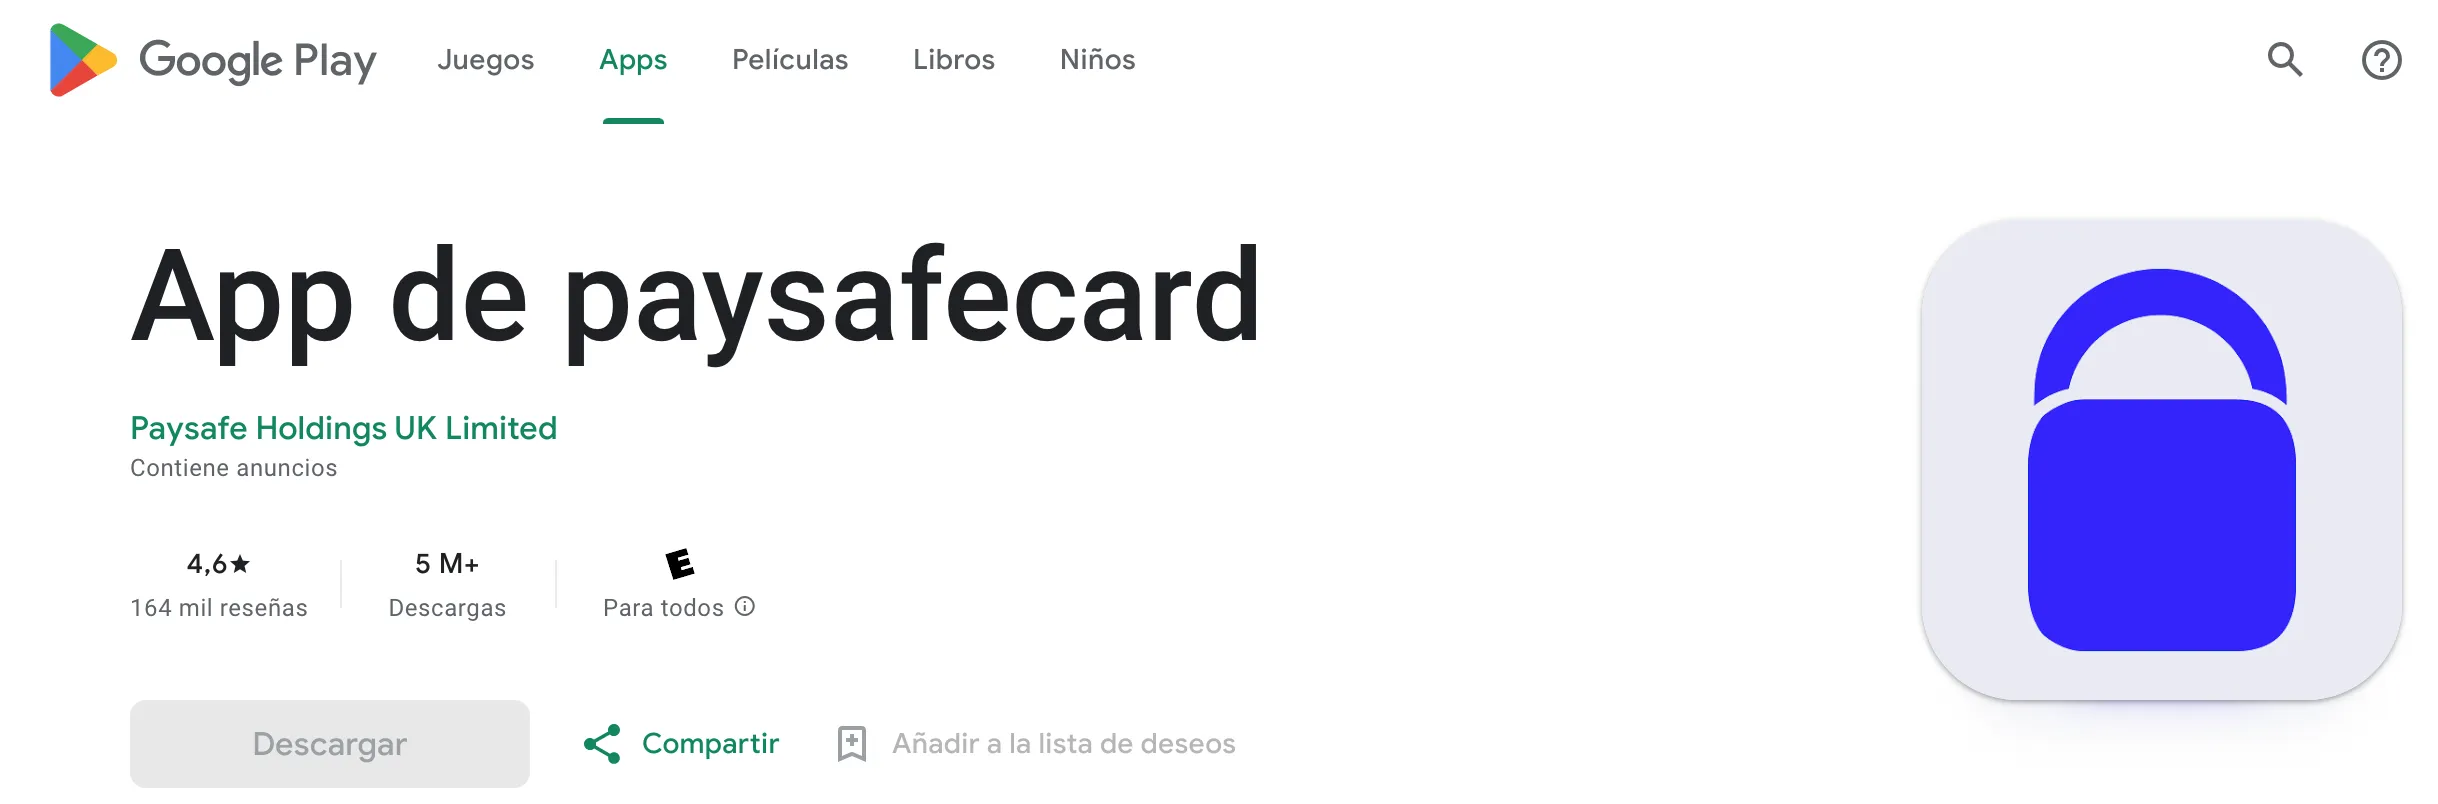 Paysafecard Android app